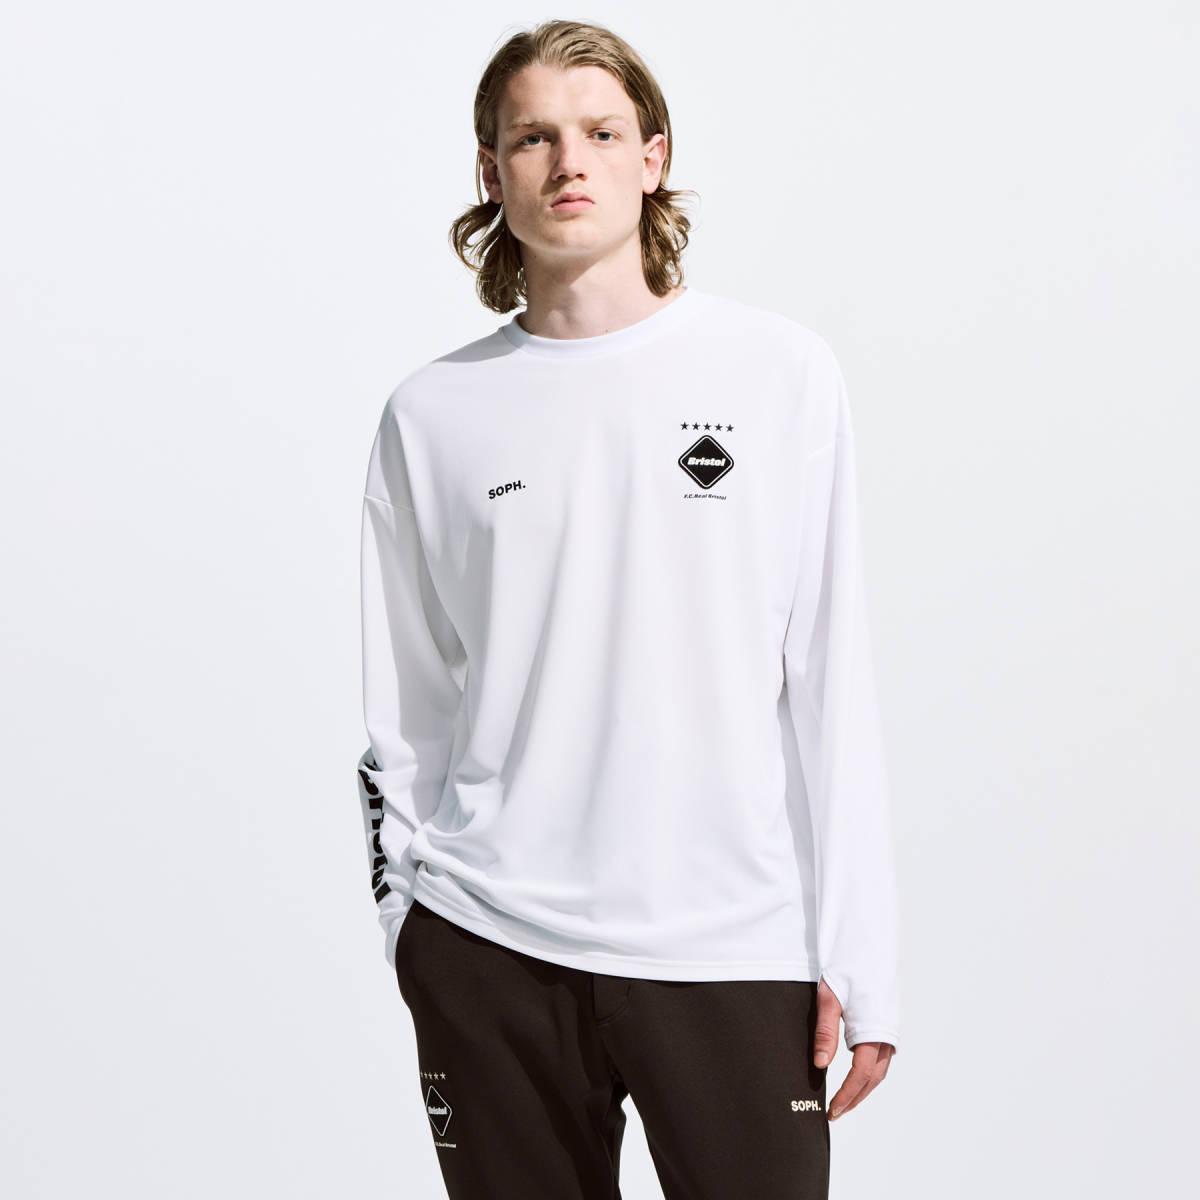 XL FCRB 23AW L/S TEAM PRACTICE TOP ロンT-